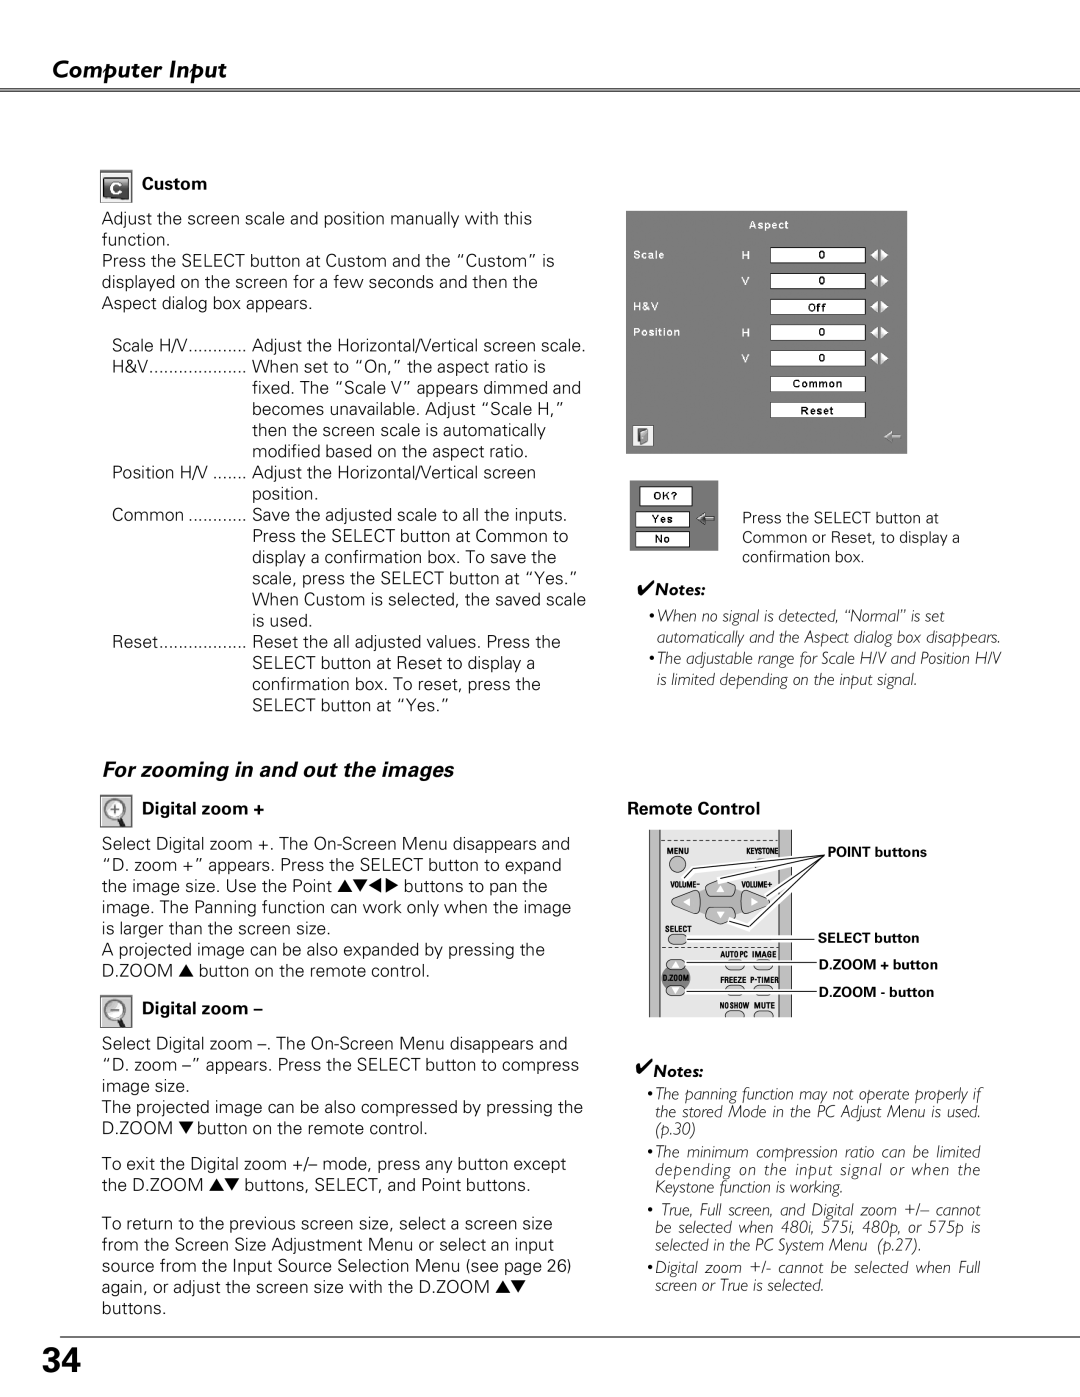 Eiki LC-XB41 owner manual For zooming in and out the images, Computer Input, Custom, Digital zoom +, Remote Control 